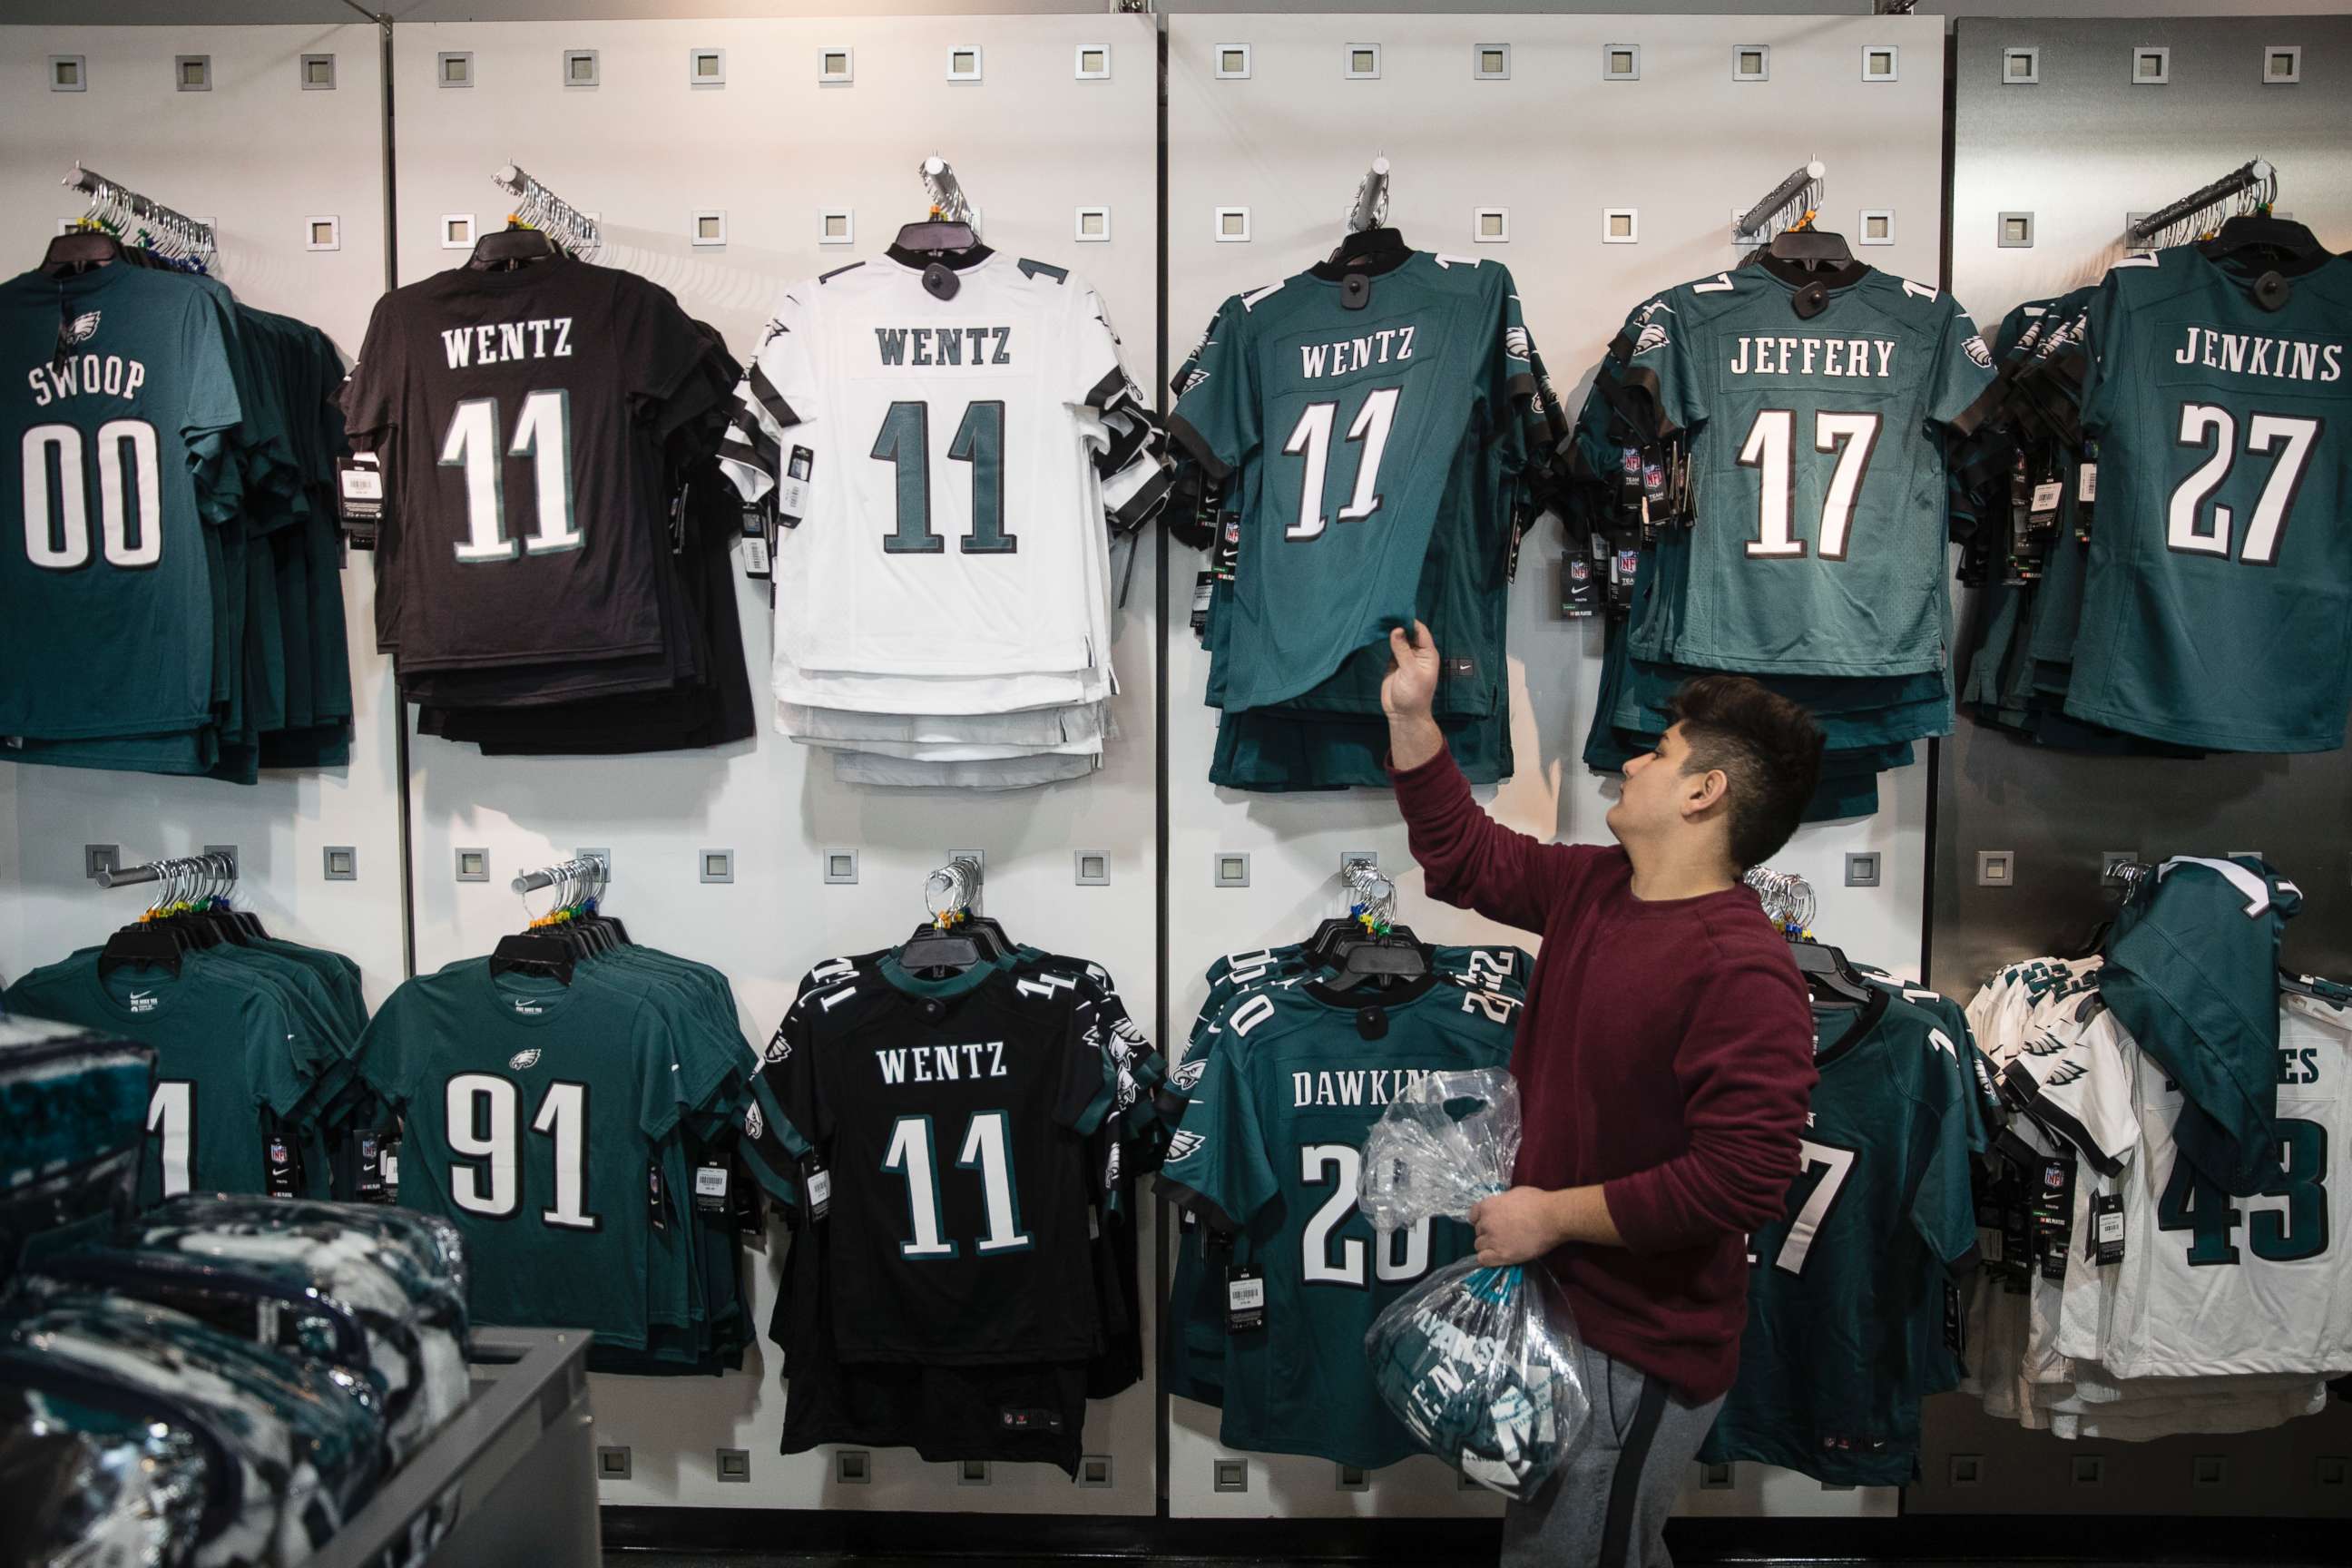 PHOTO: A fan shops for Philadelphia Eagles apparel in Philadelphia, Jan. 22, 2018. The Eagles defeated the Minnesota Vikings 38-7 in the AFC Championship on Sunday to advance to the Super Bowl against the New England Patriots.